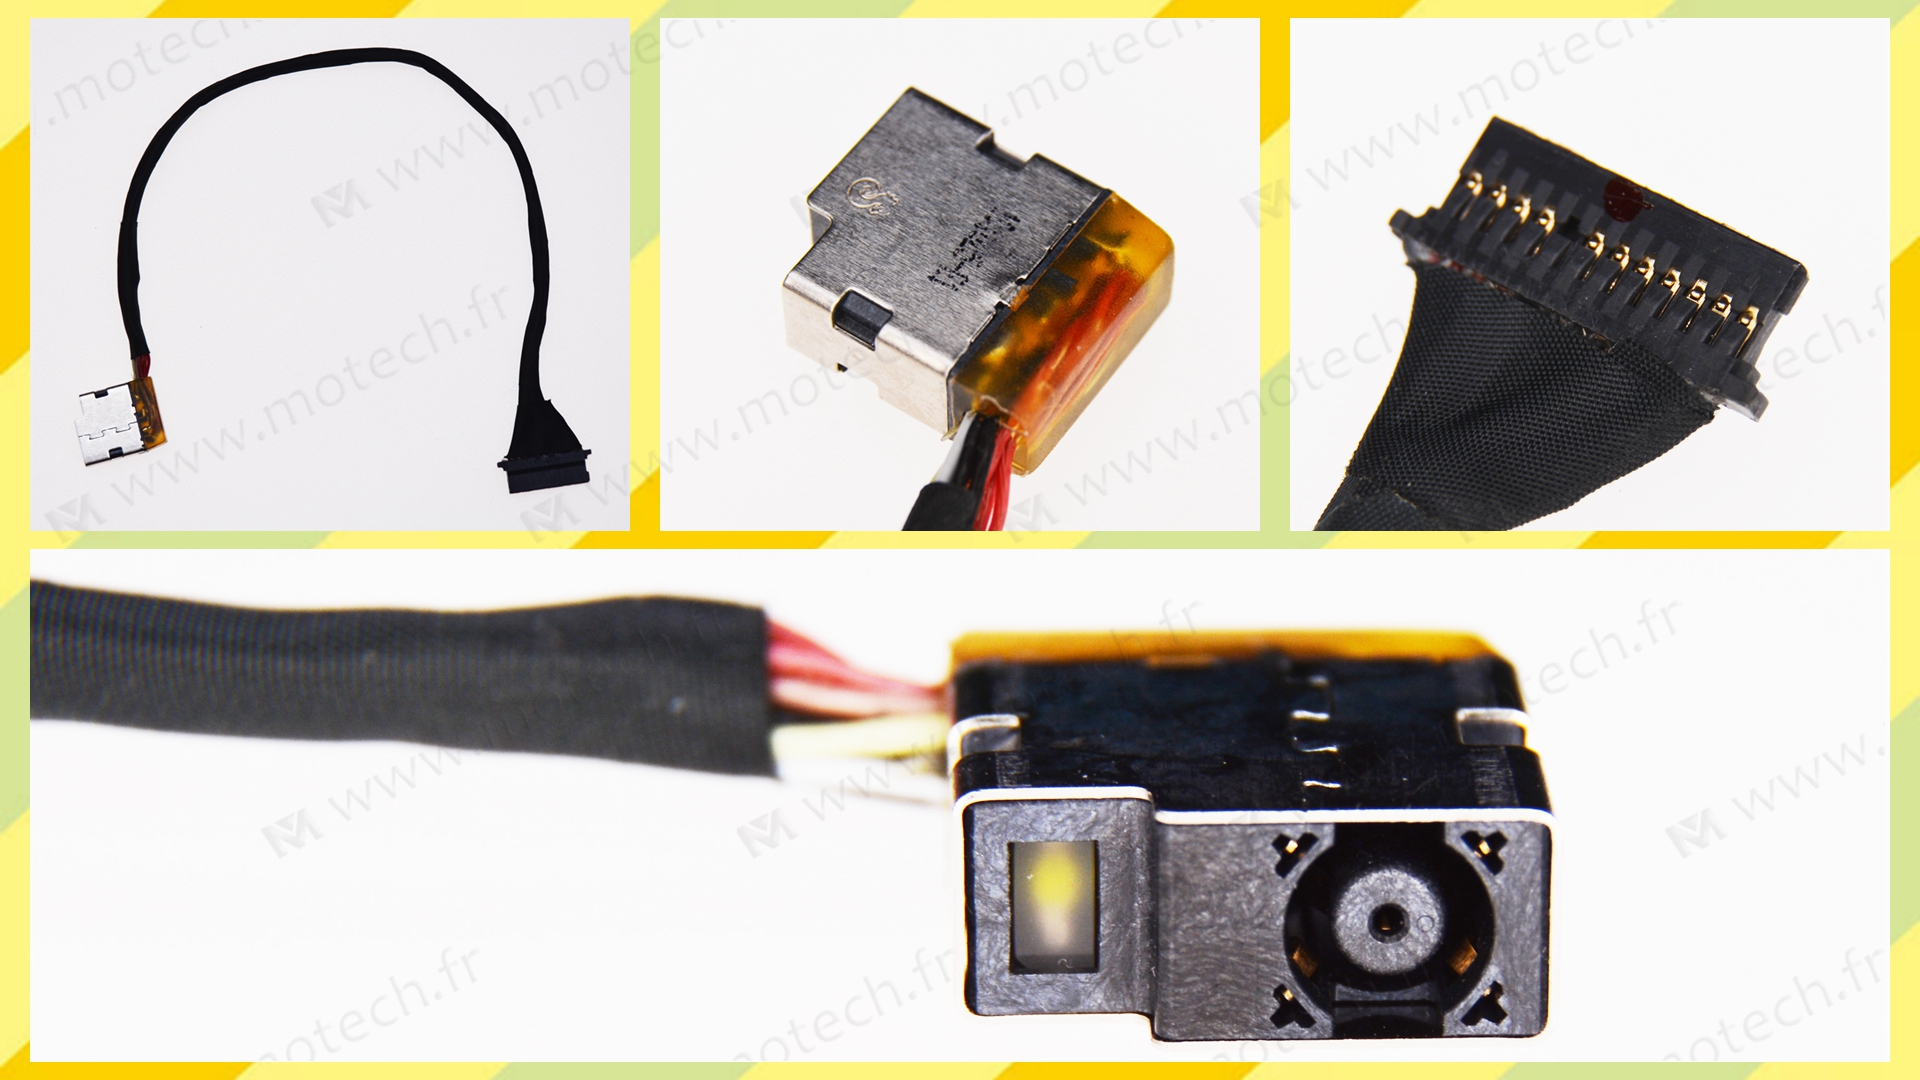 HP 17-an112nf charging connector, HP 17-an112nf DC Power Jack, HP 17-an112nf DC IN Cable, HP 17-an112nf Power Jack, HP 17-an112nf plug, HP 17-an112nf Jack socket, HP 17-an112nf connecteur de charge, 